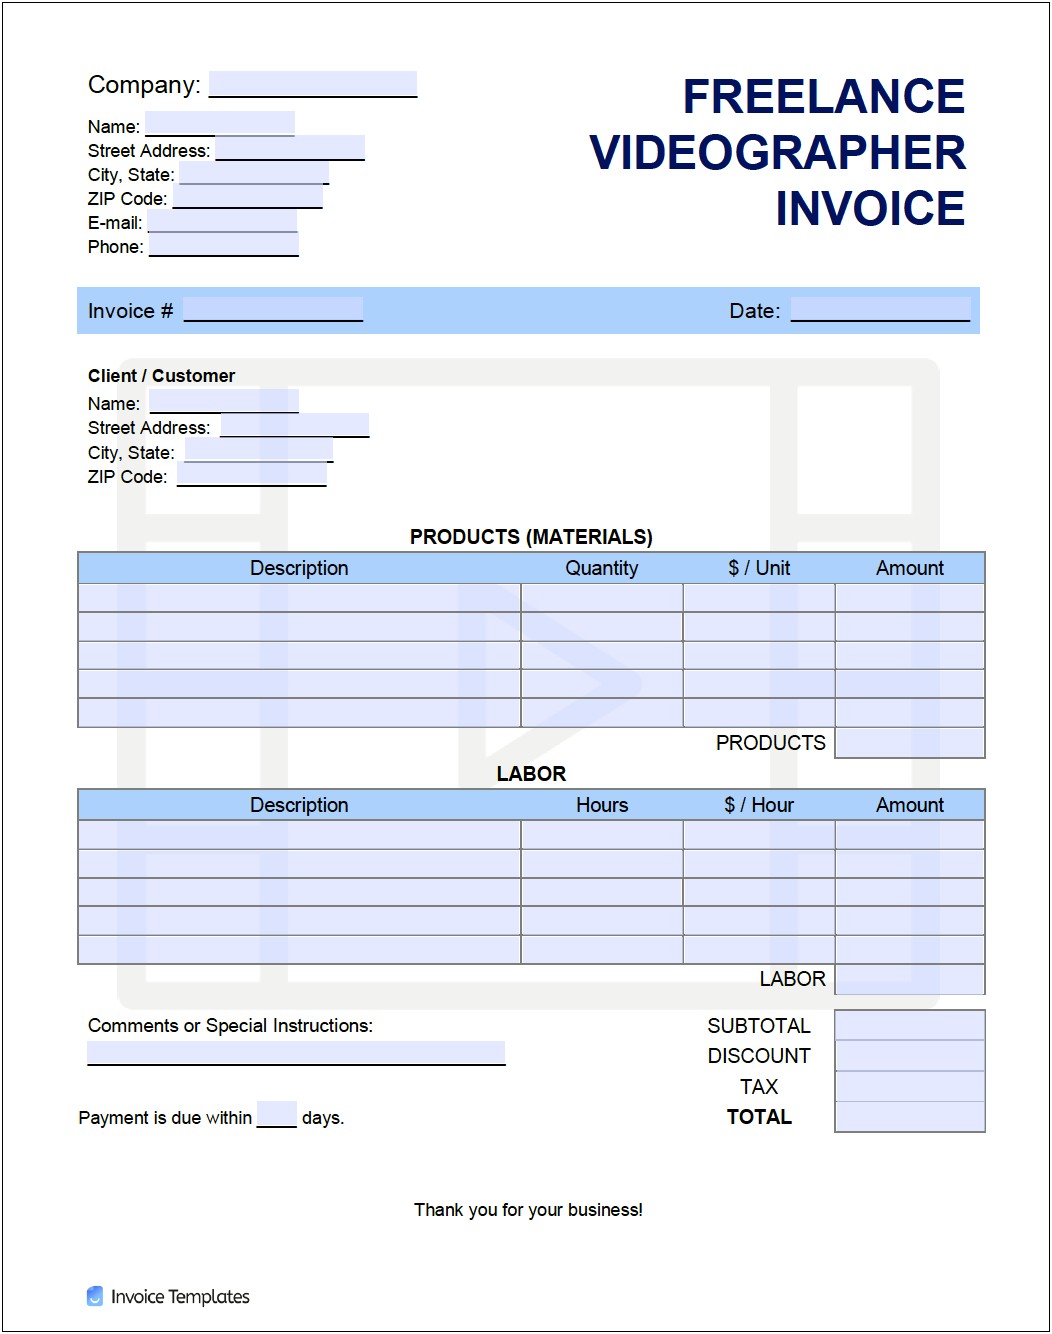 Best Free Downloadable Invoice Template For Freelance Interpreter